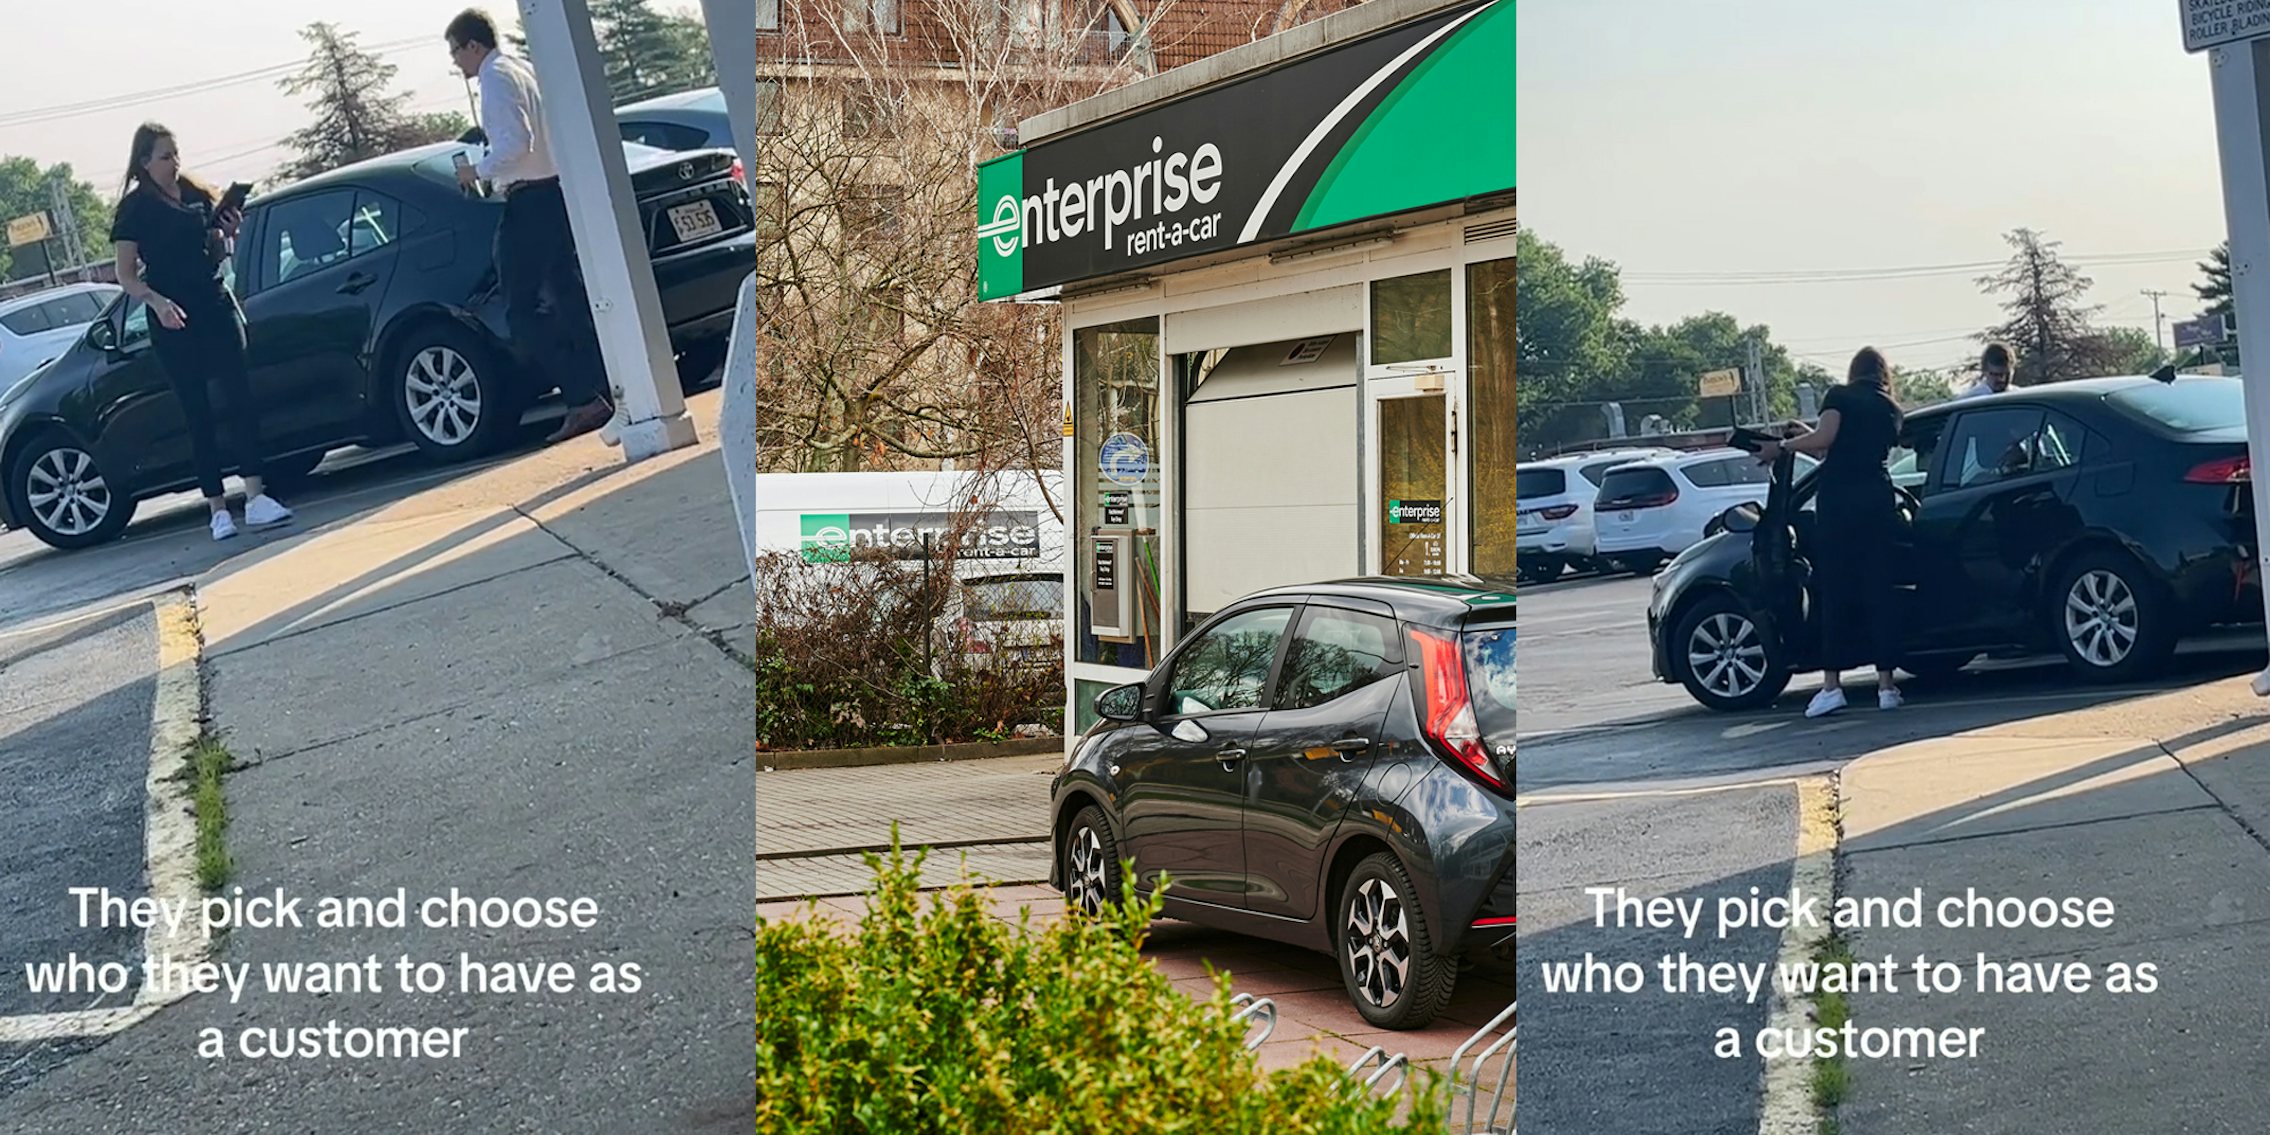 Enterprise employee showing customer car with caption 'They pick and choose who they want to have as a customer' (l) Enterprise building with sign and car (c) Enterprise employee showing customer car with caption 'They pick and choose who they want to have as a customer' (r)